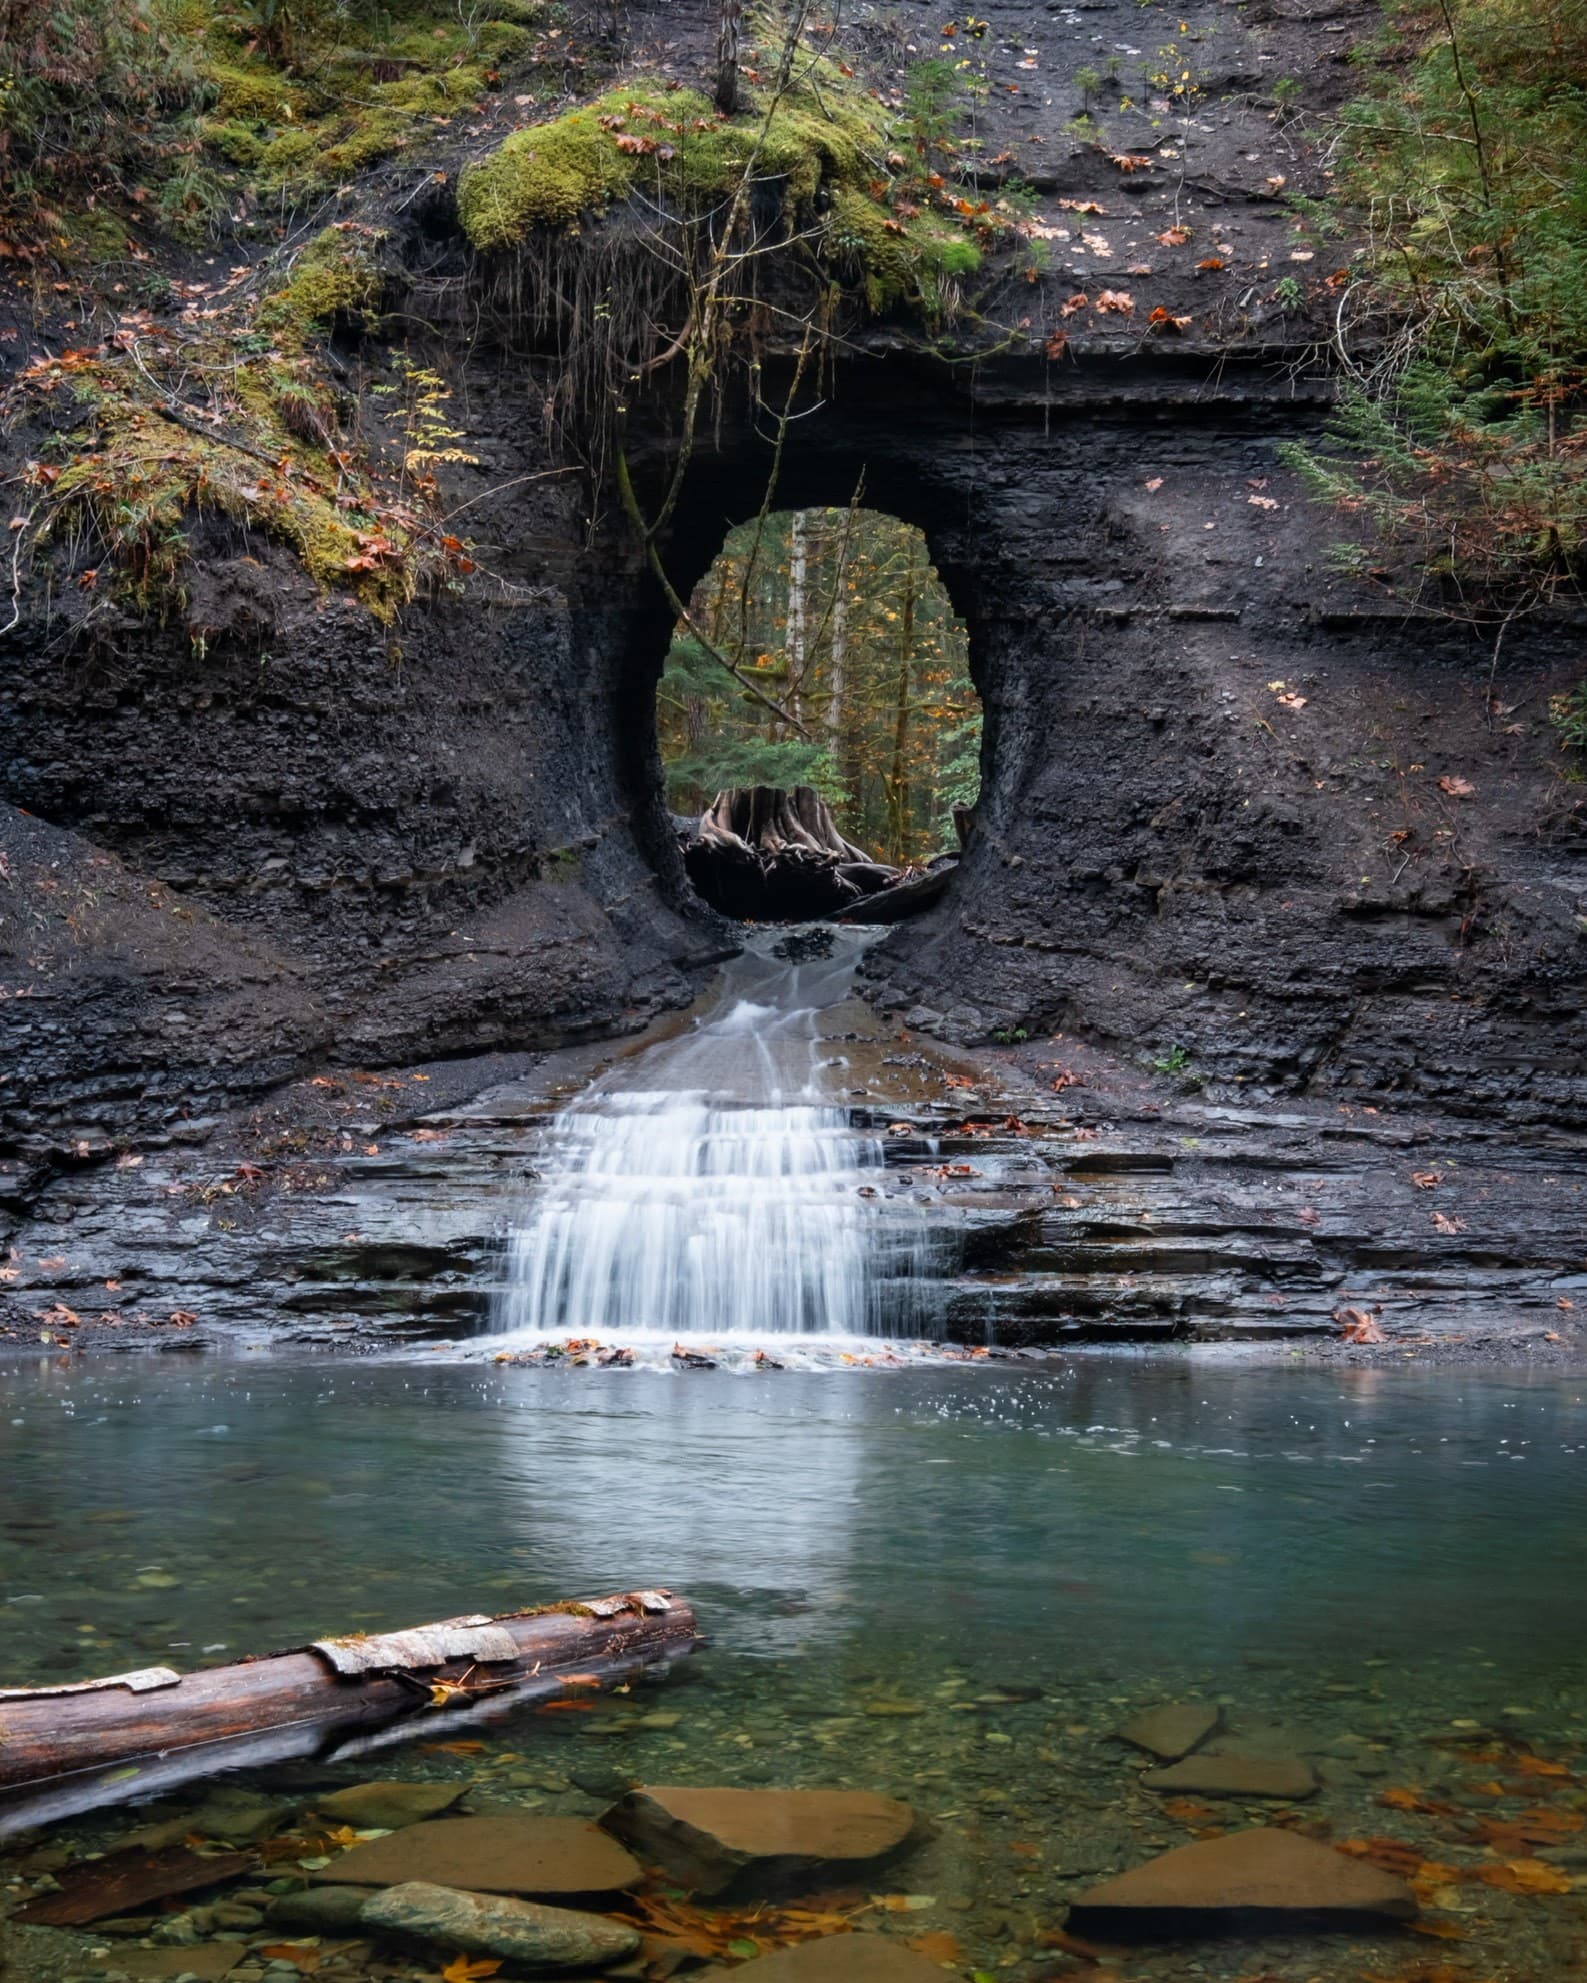 A small waterfall flowing through a hole in the rock face.